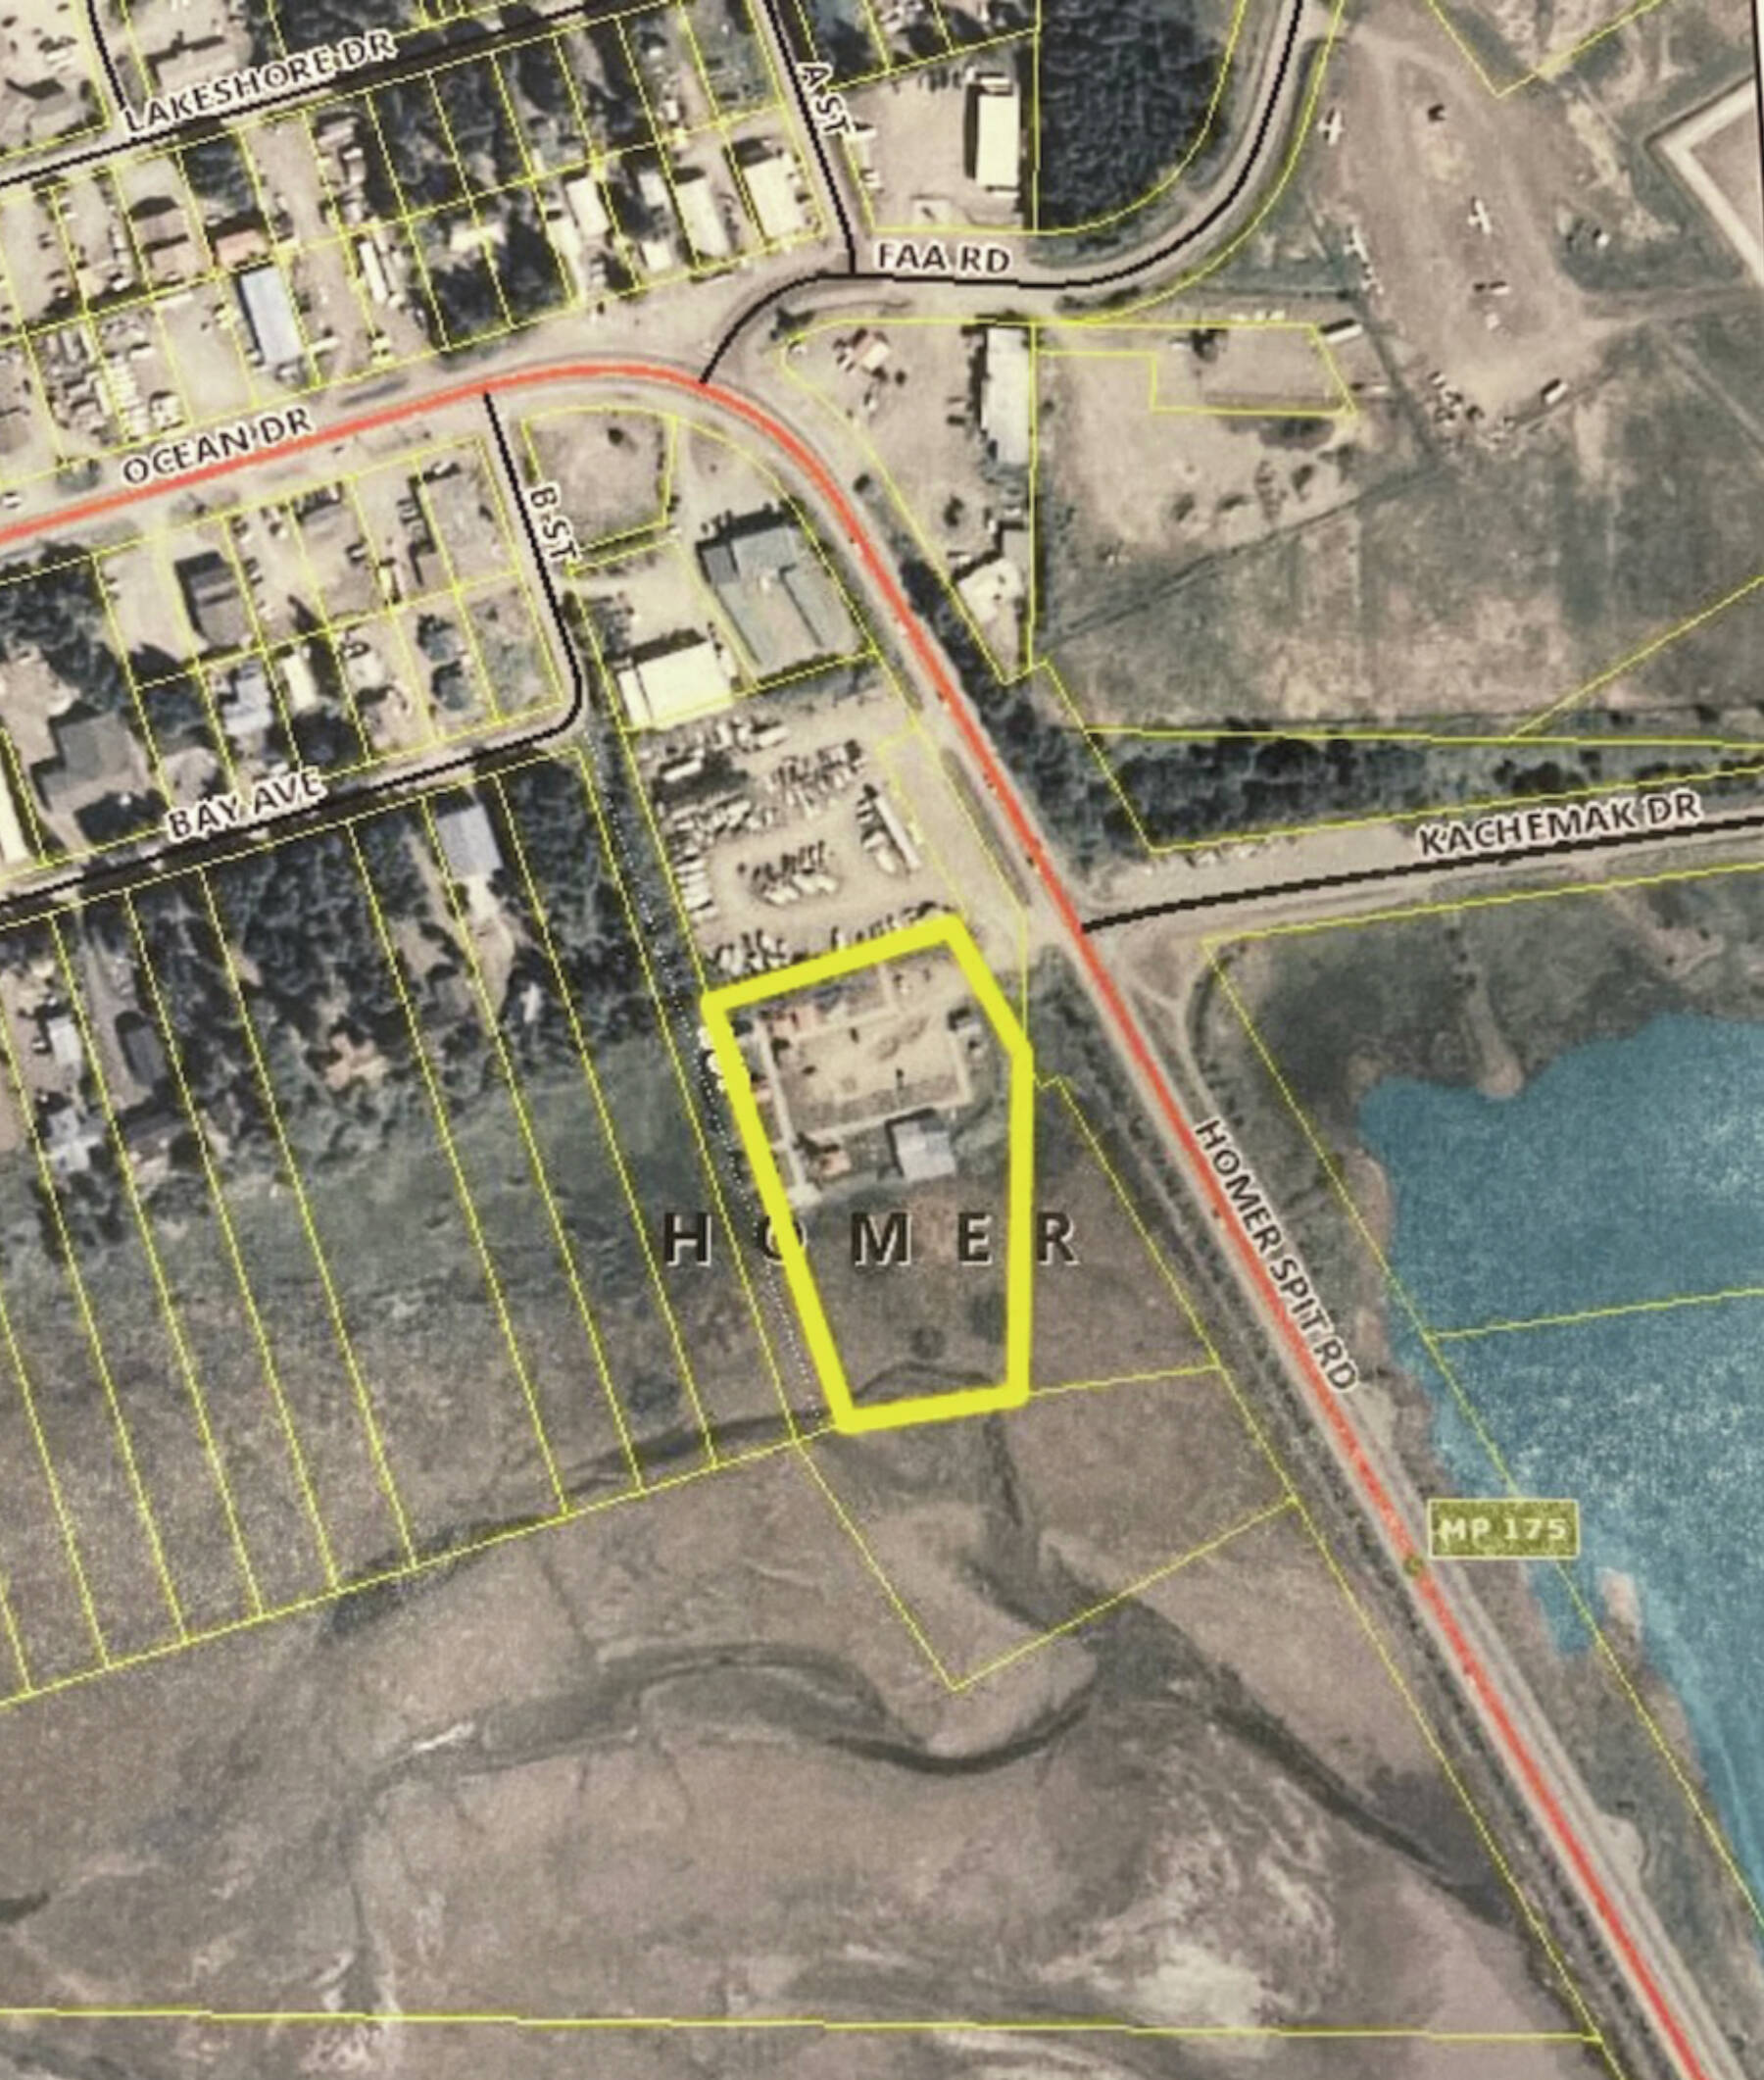 Image from the Kenai Peninsula Borough Assessing Department parcel viewer
Front parcel of land at Lighthouse Village on Homer Spit Road purchased by Doyon Limited in March 2023.